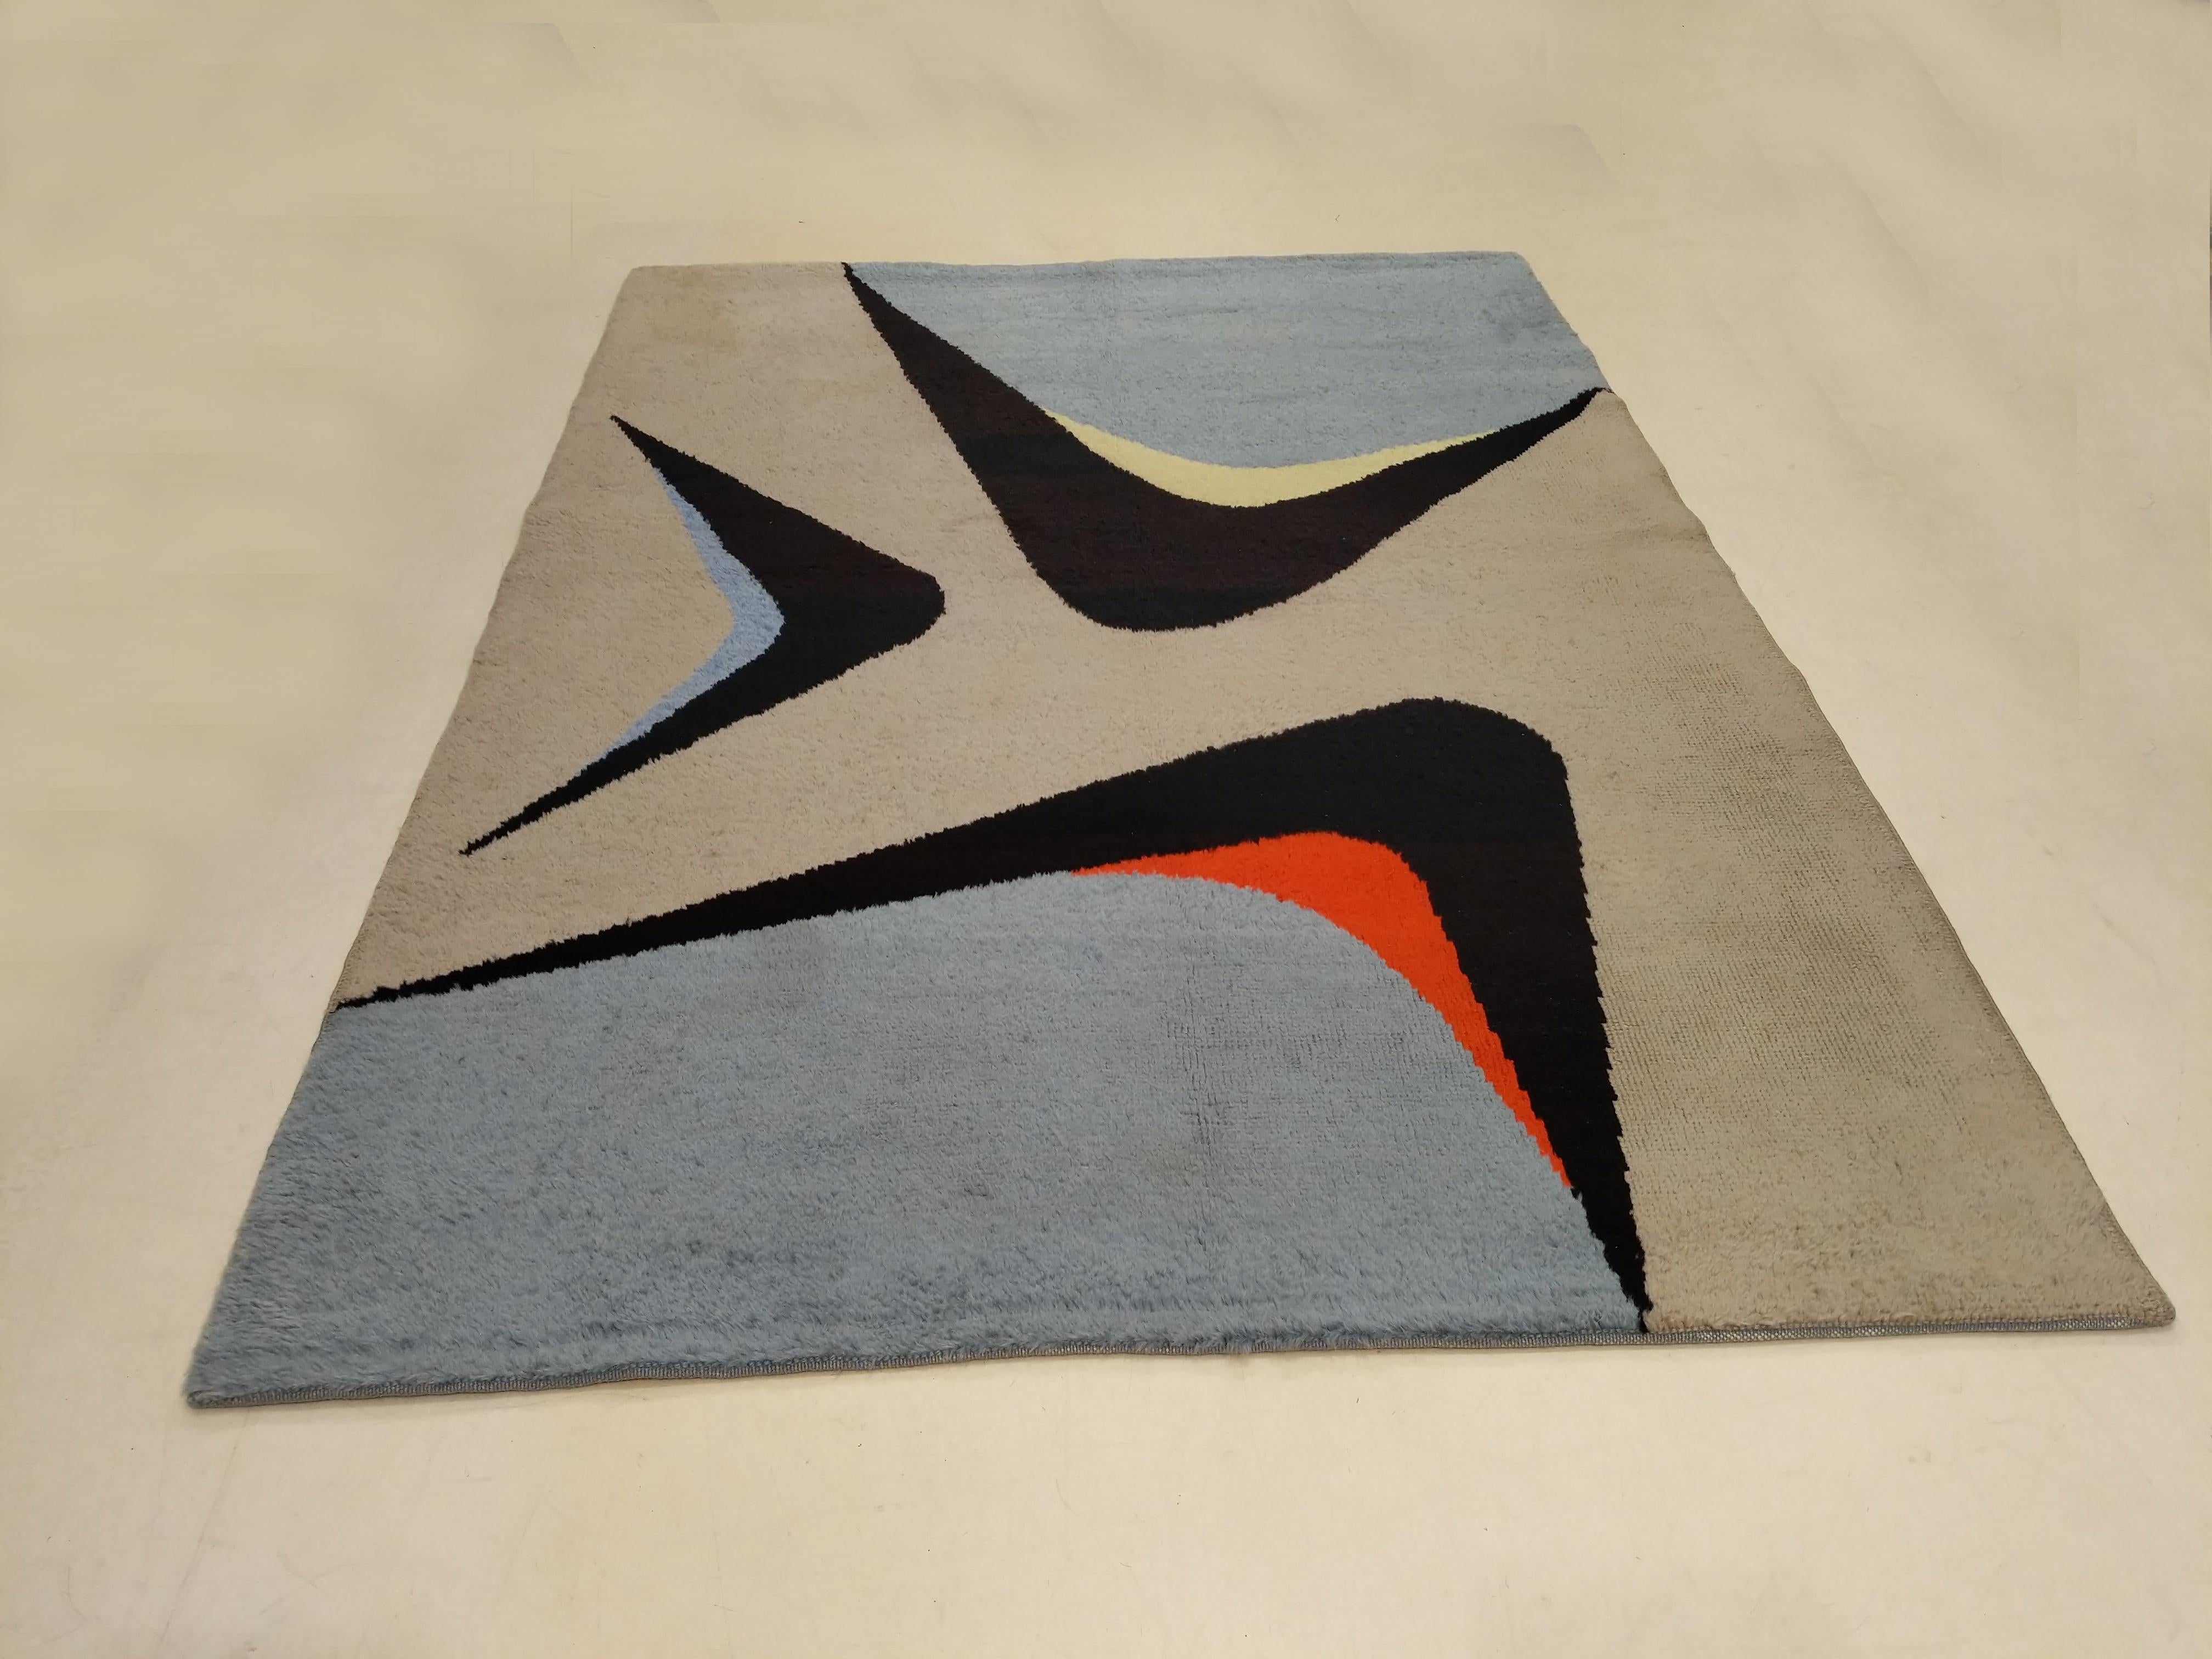 French Midcentury Design Rug by Jacques Borker For Sale 2